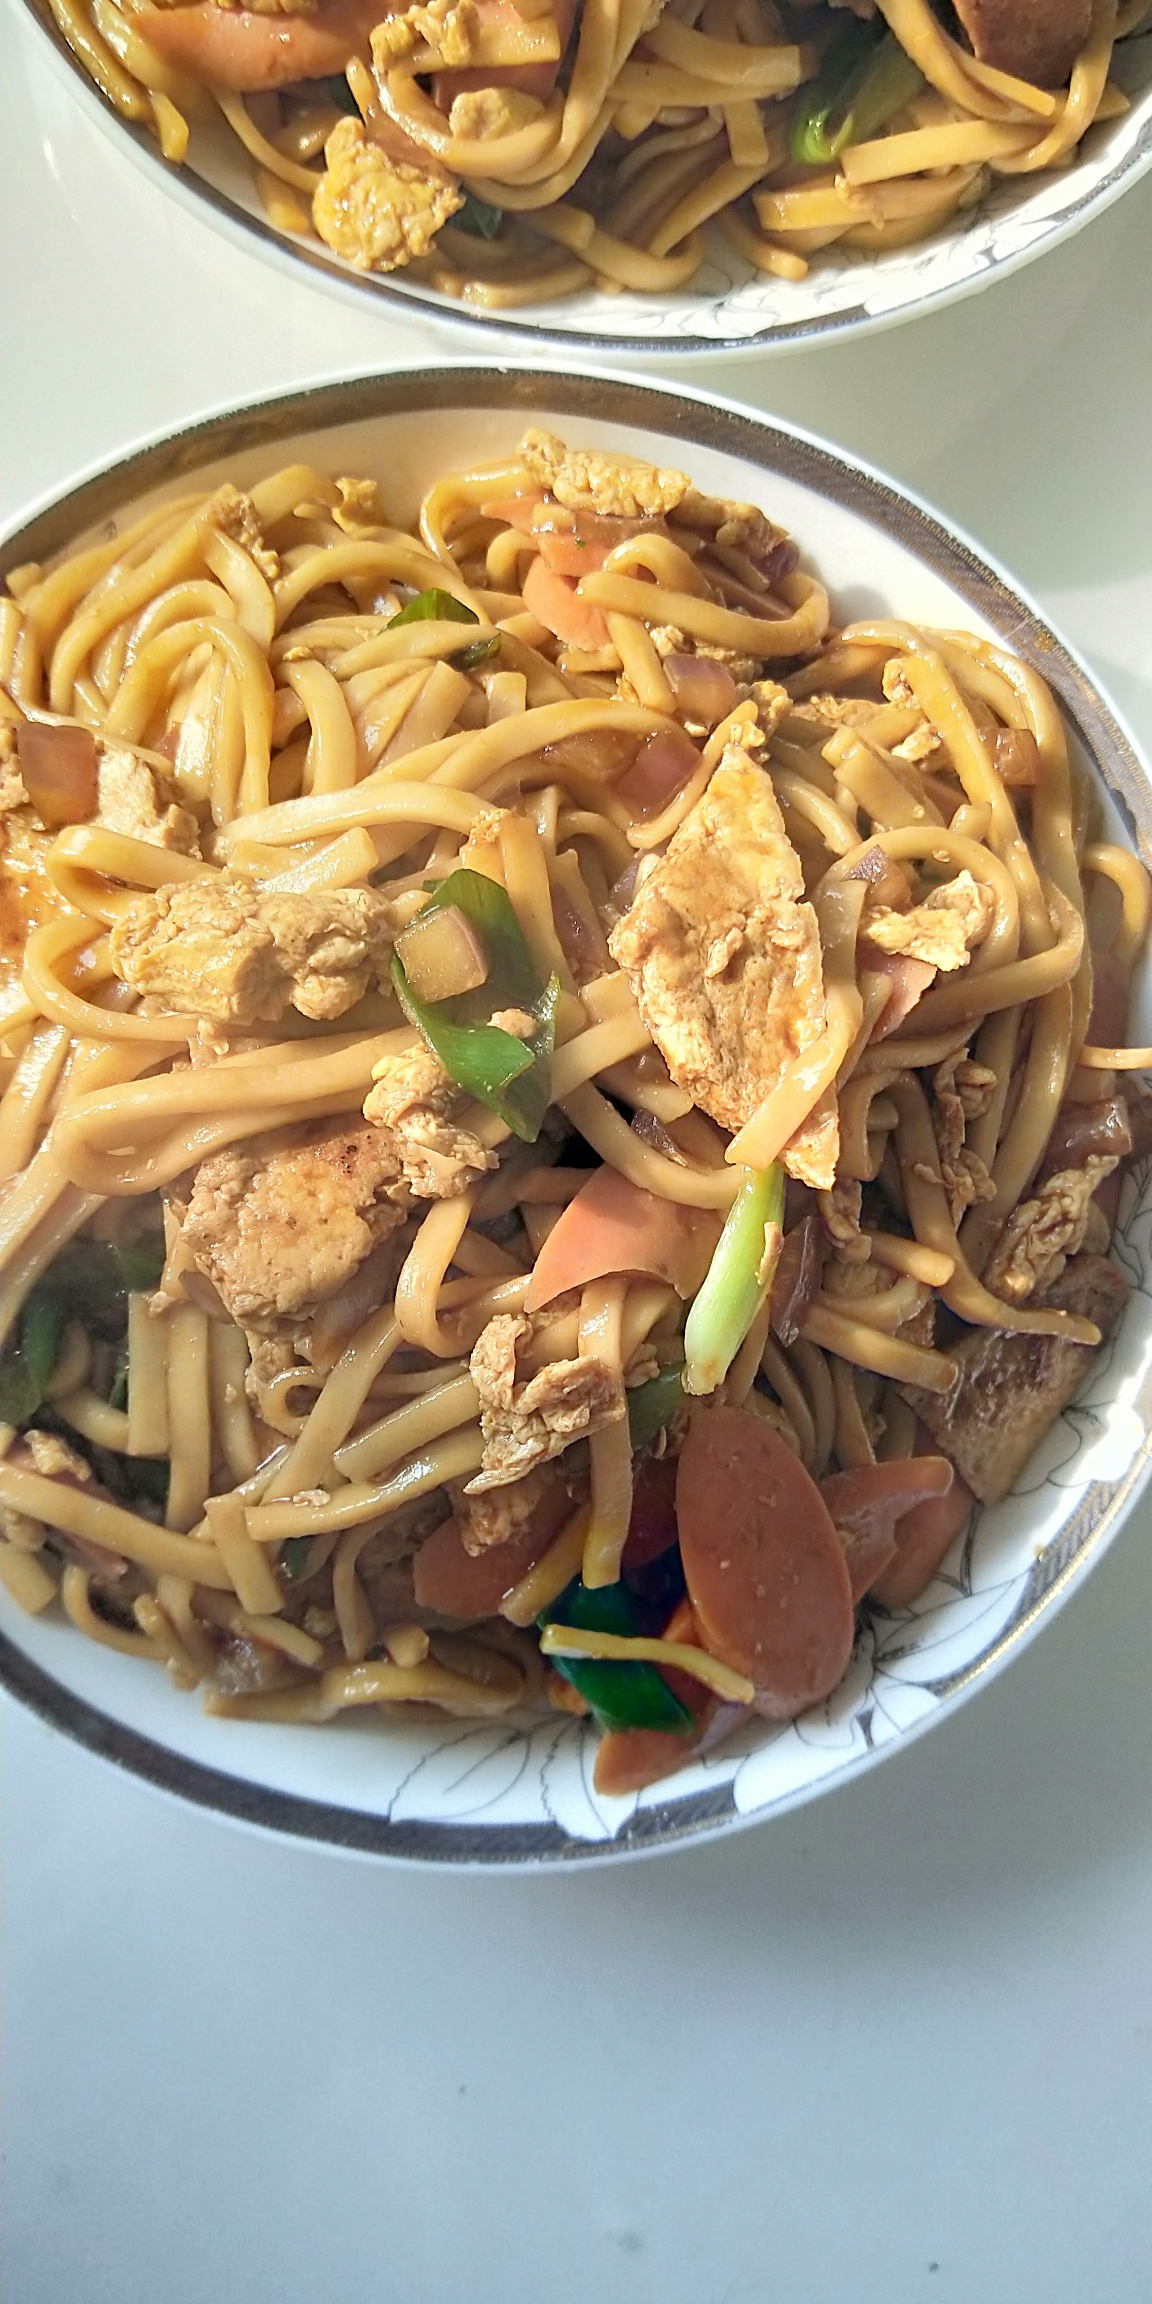 
Fry noodle not to have the practice of United States colour, how to do delicious